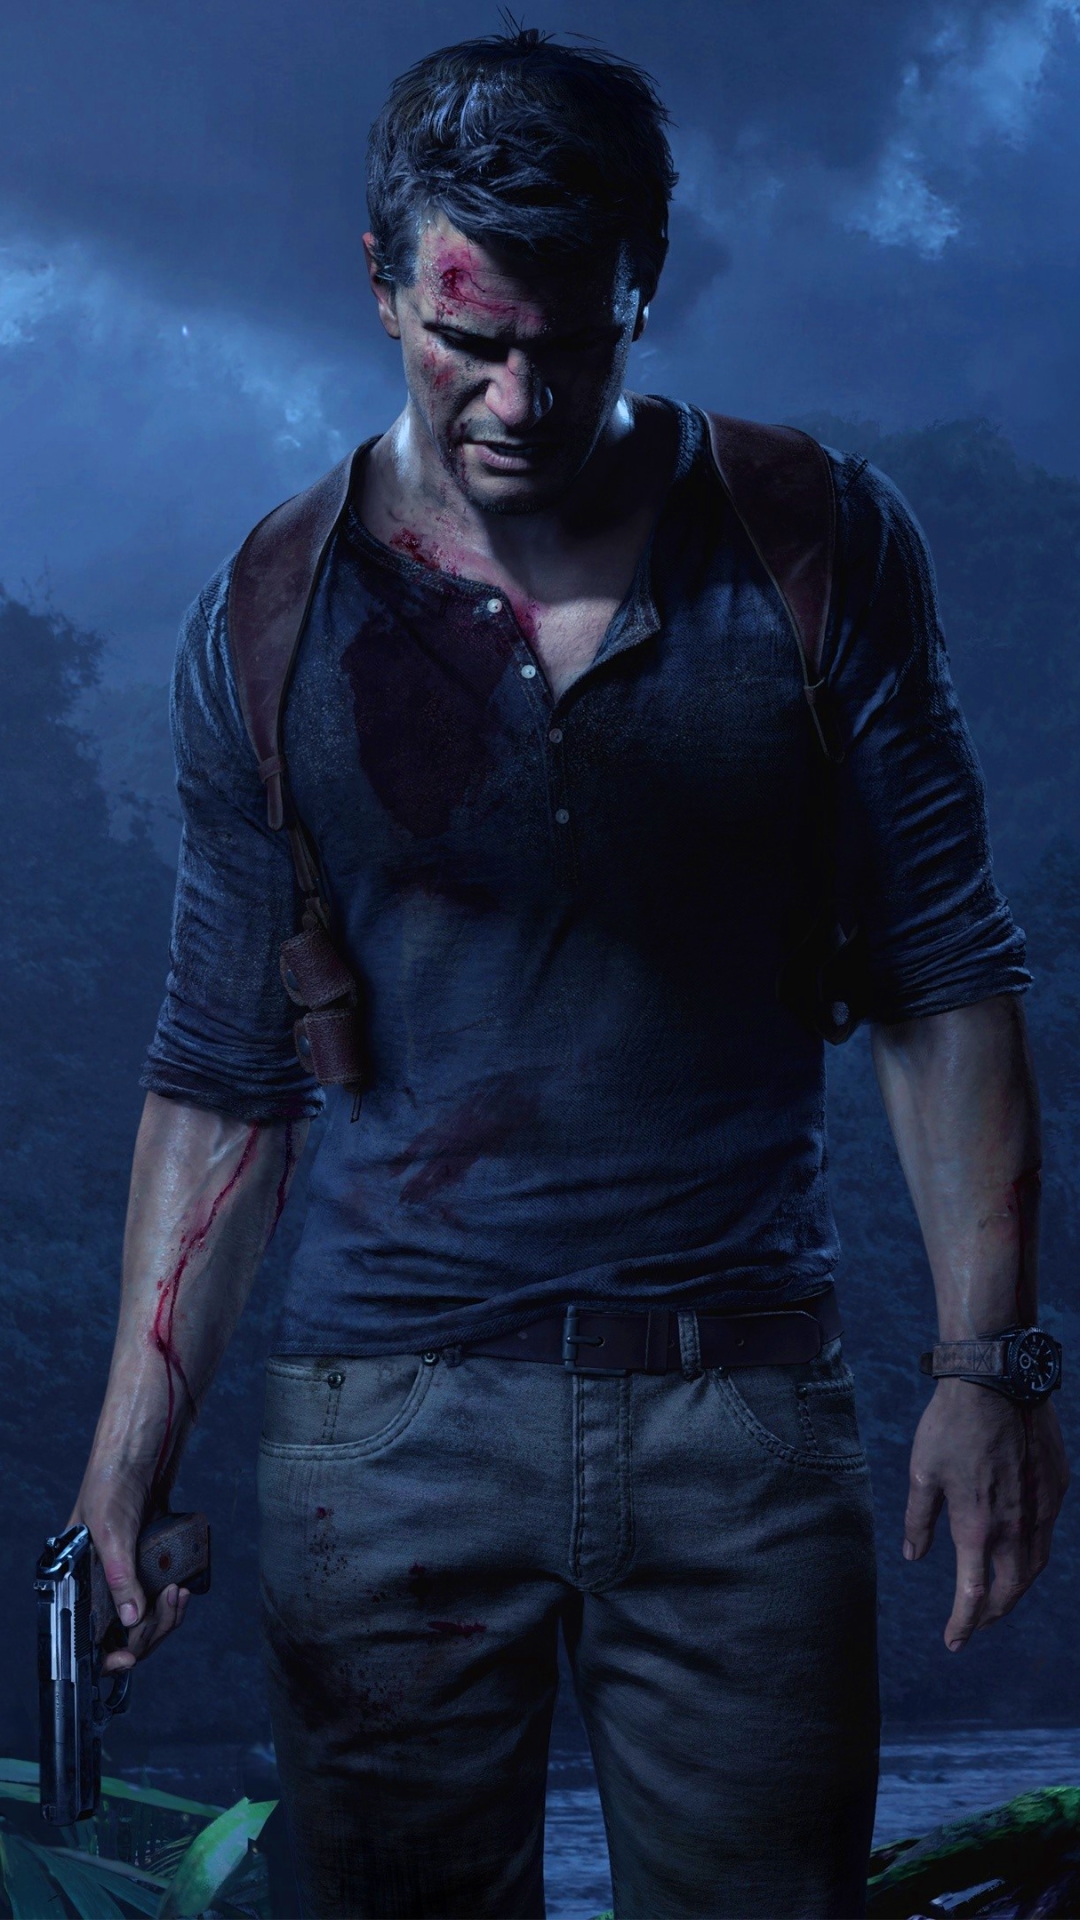 uncharted, uncharted 4: a thief's end, gun, video game, nathan drake